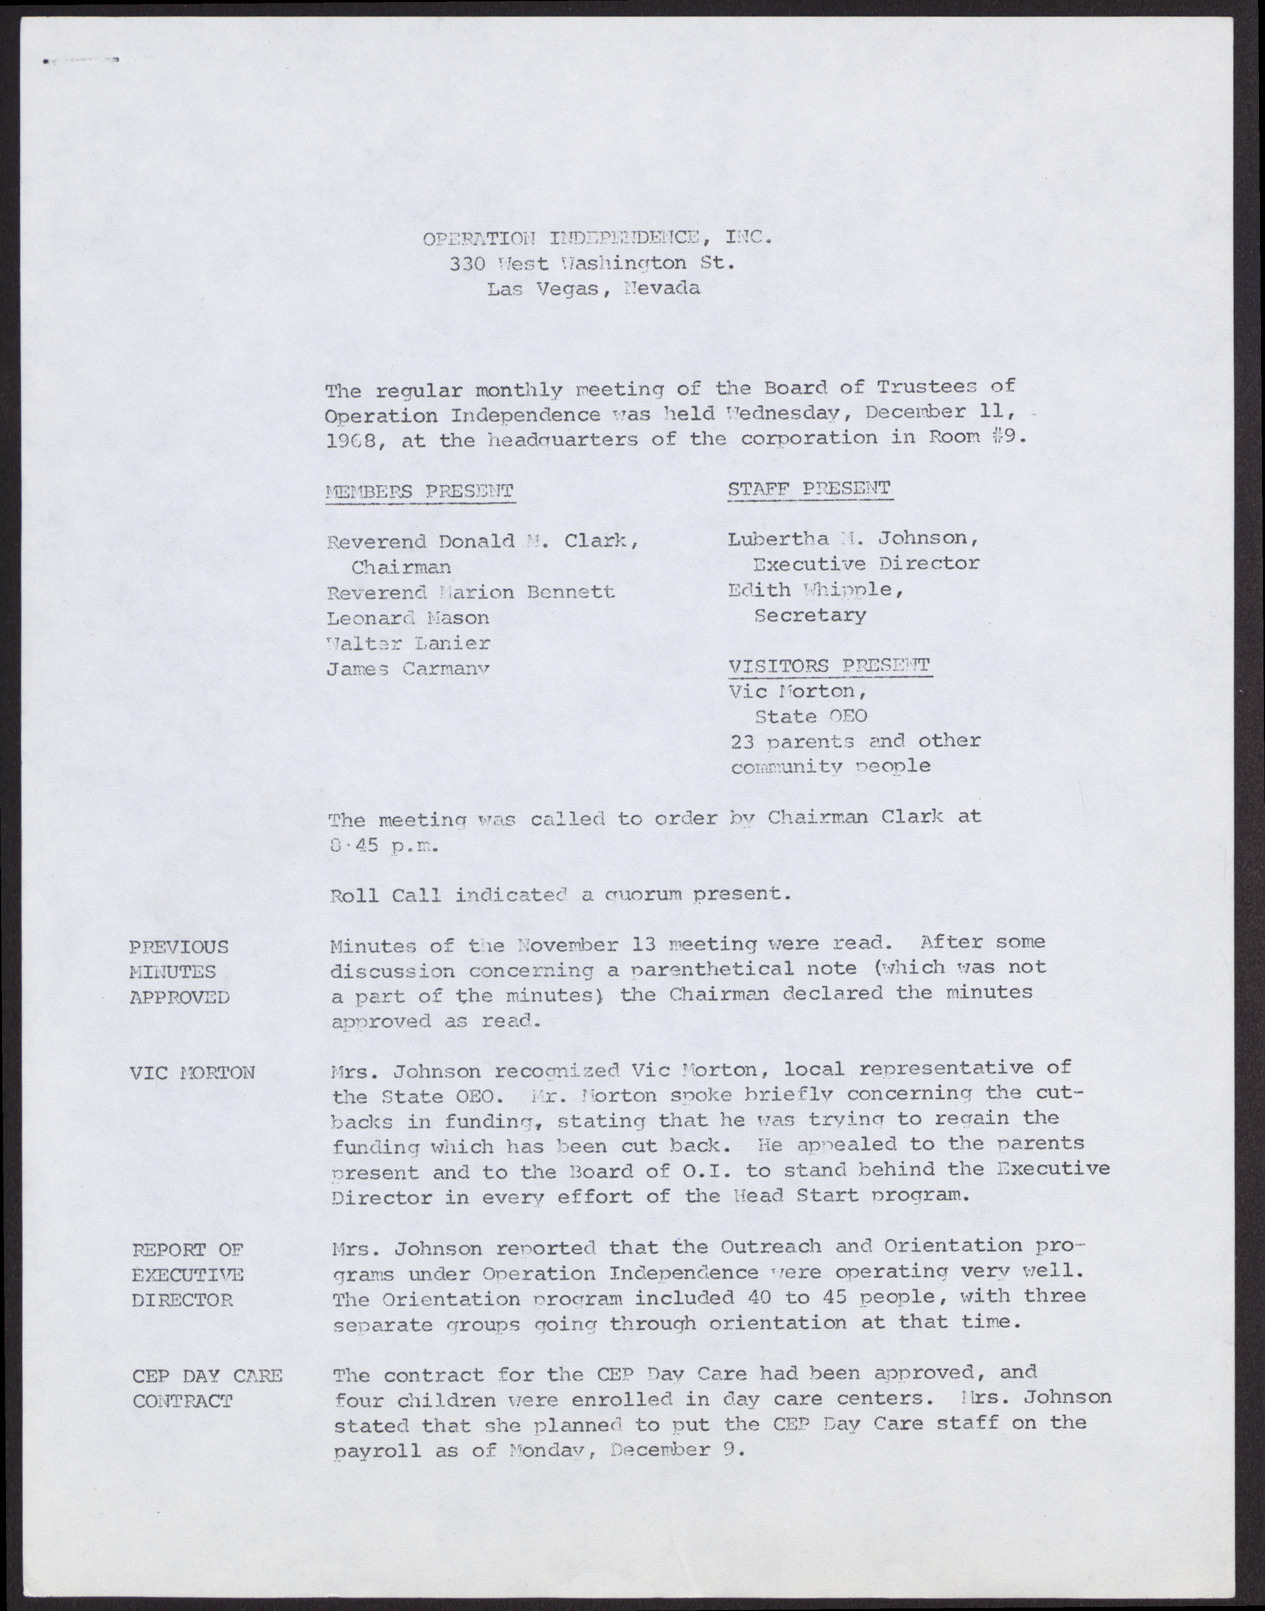 Minutes from Operation Independence meeting (4 pages), December 11, 1968